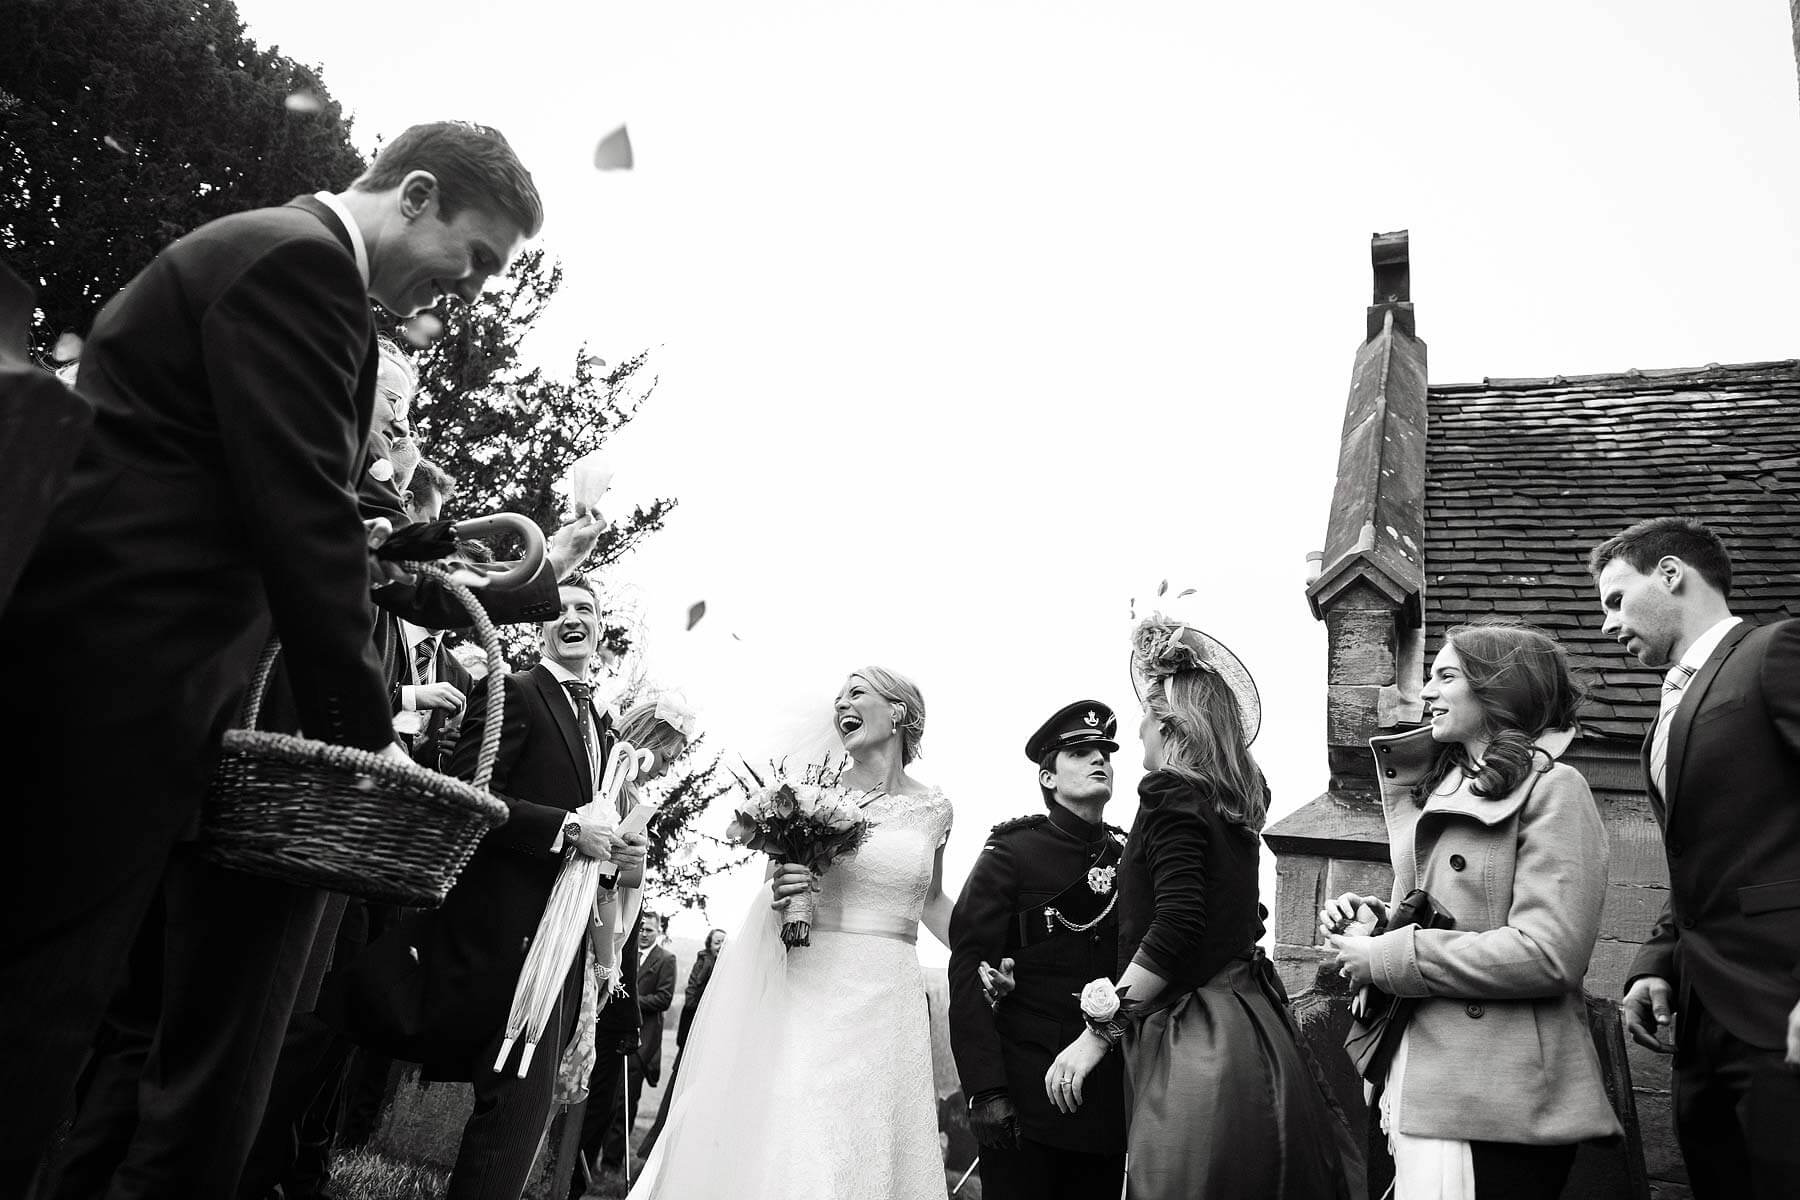 Fabulous emotions and expressions captured in this wonderful reportage photograph as the bride and groom leave the church at Sandon Hall in Stafford by Documentary Wedding Photographer Stuart James